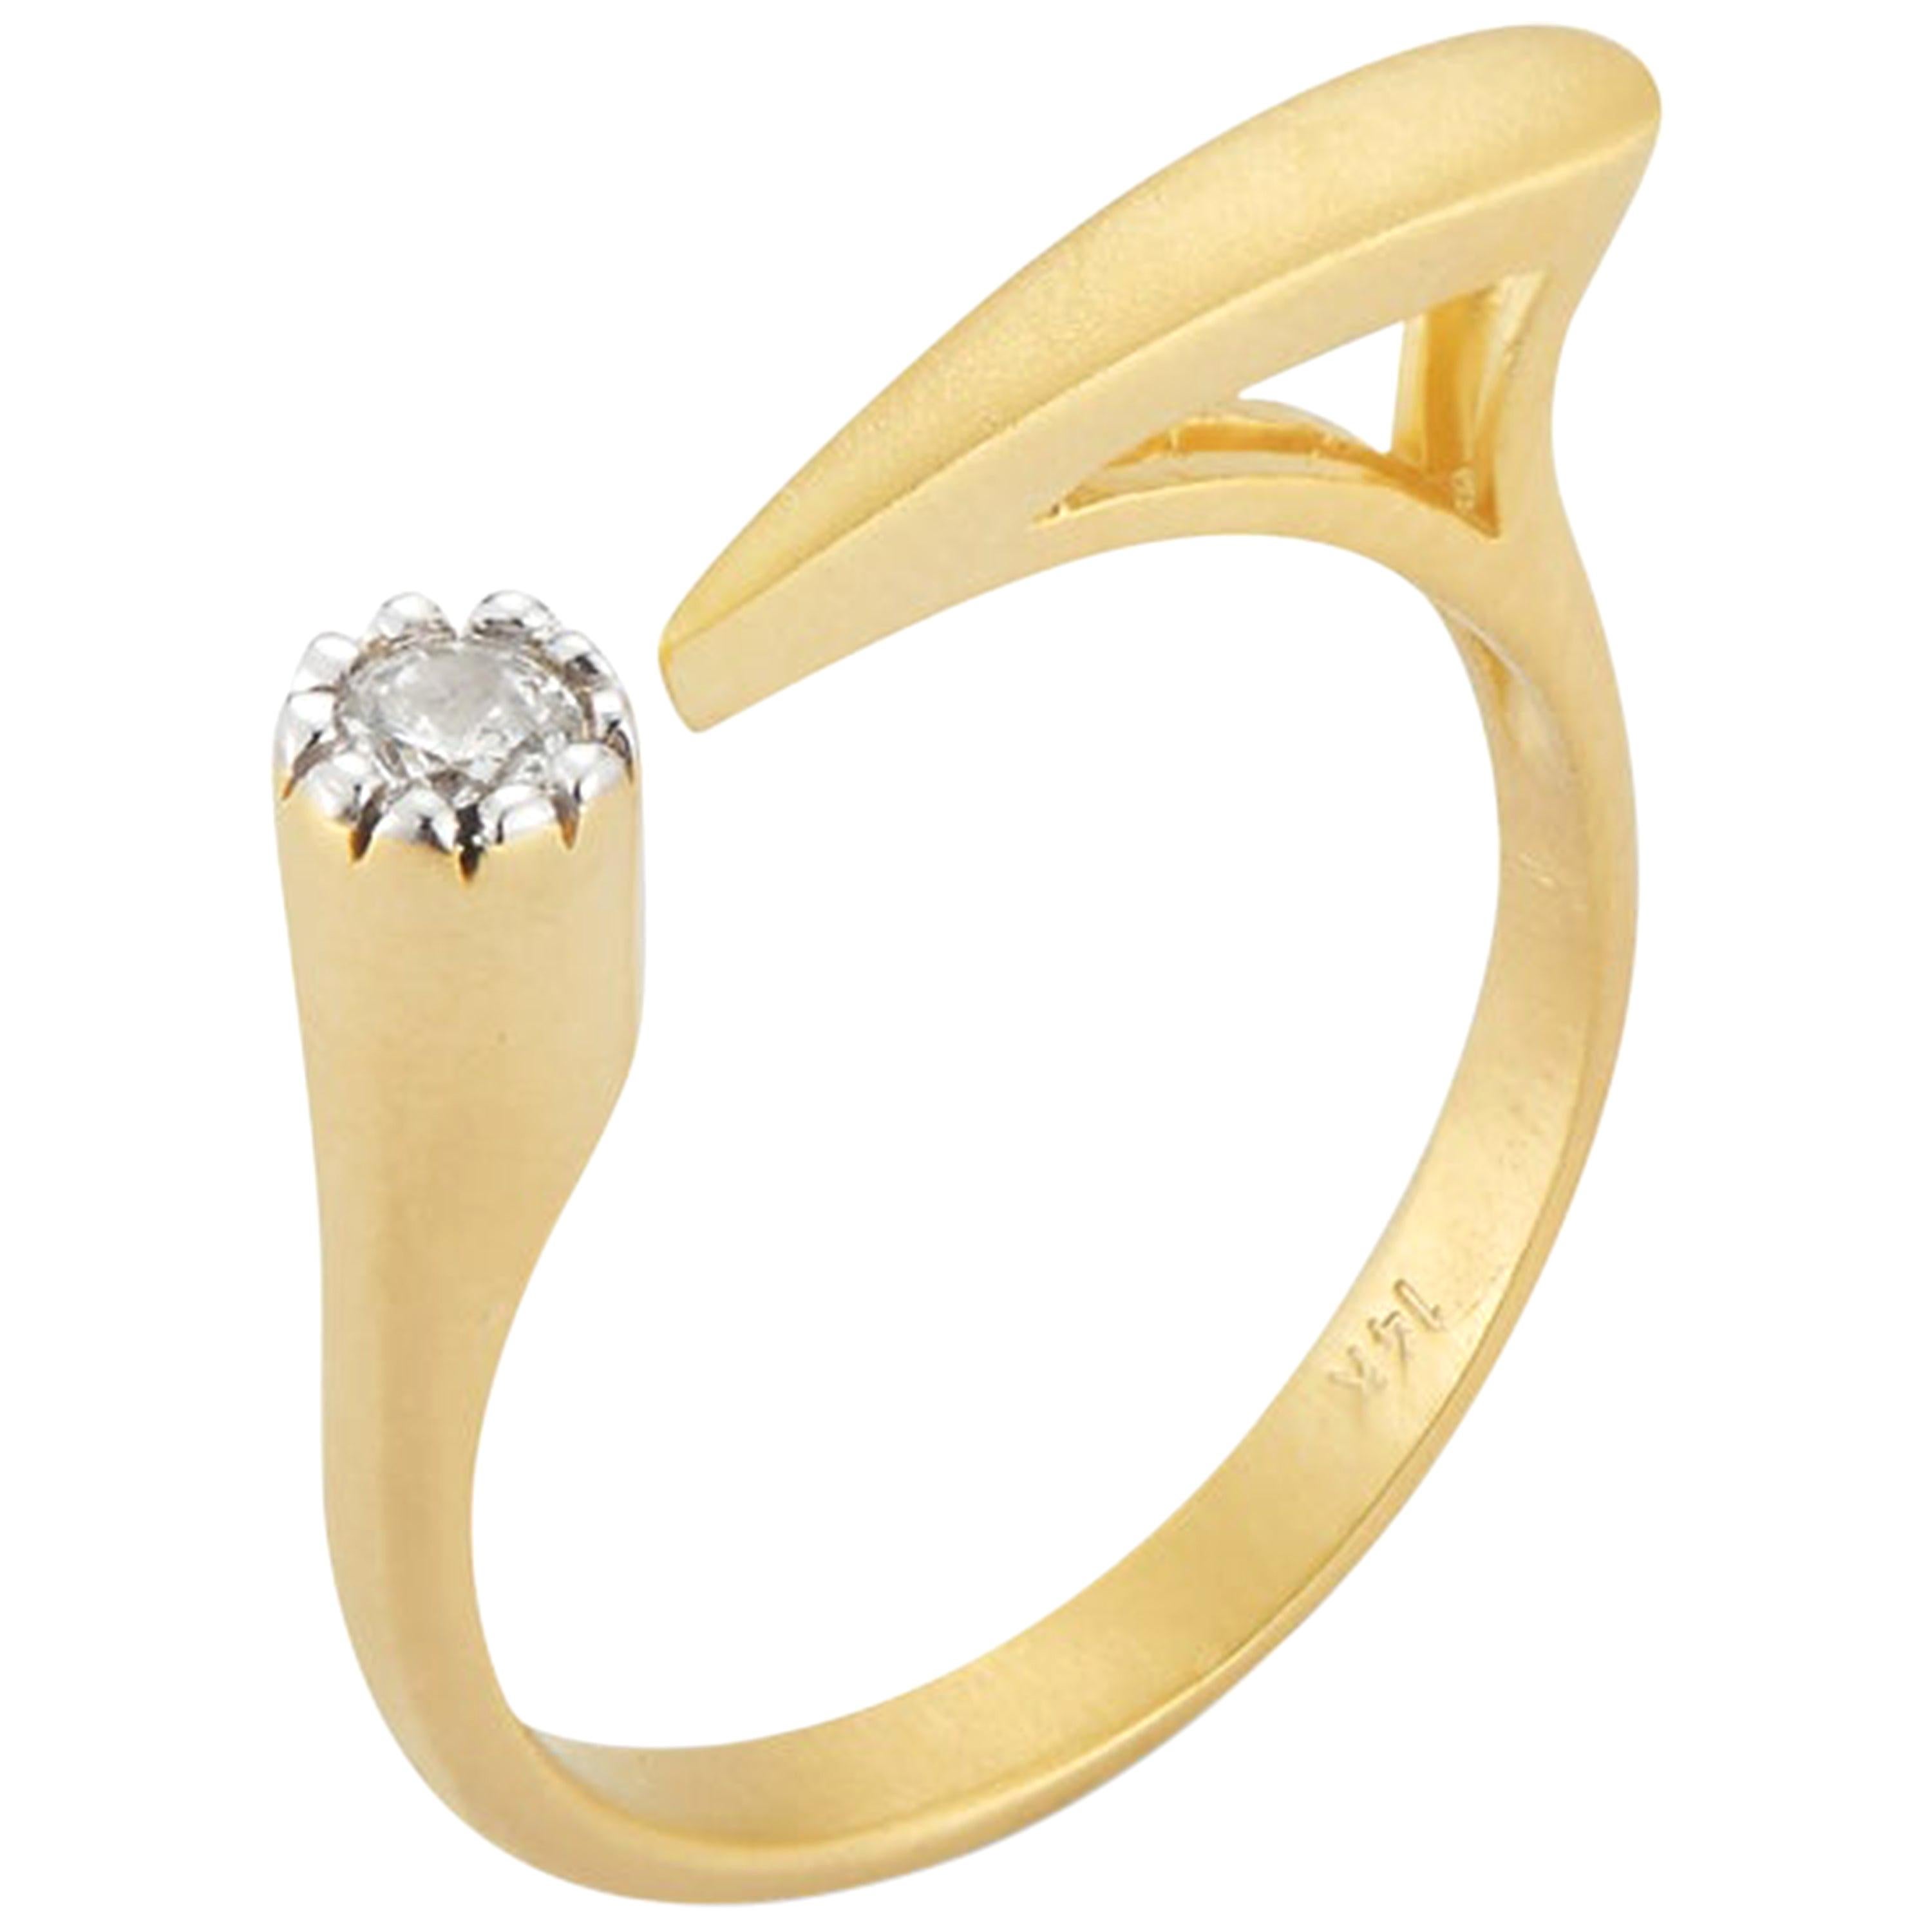 For Sale:  Handcrafted 14 Karat Yellow Gold Gap Ring